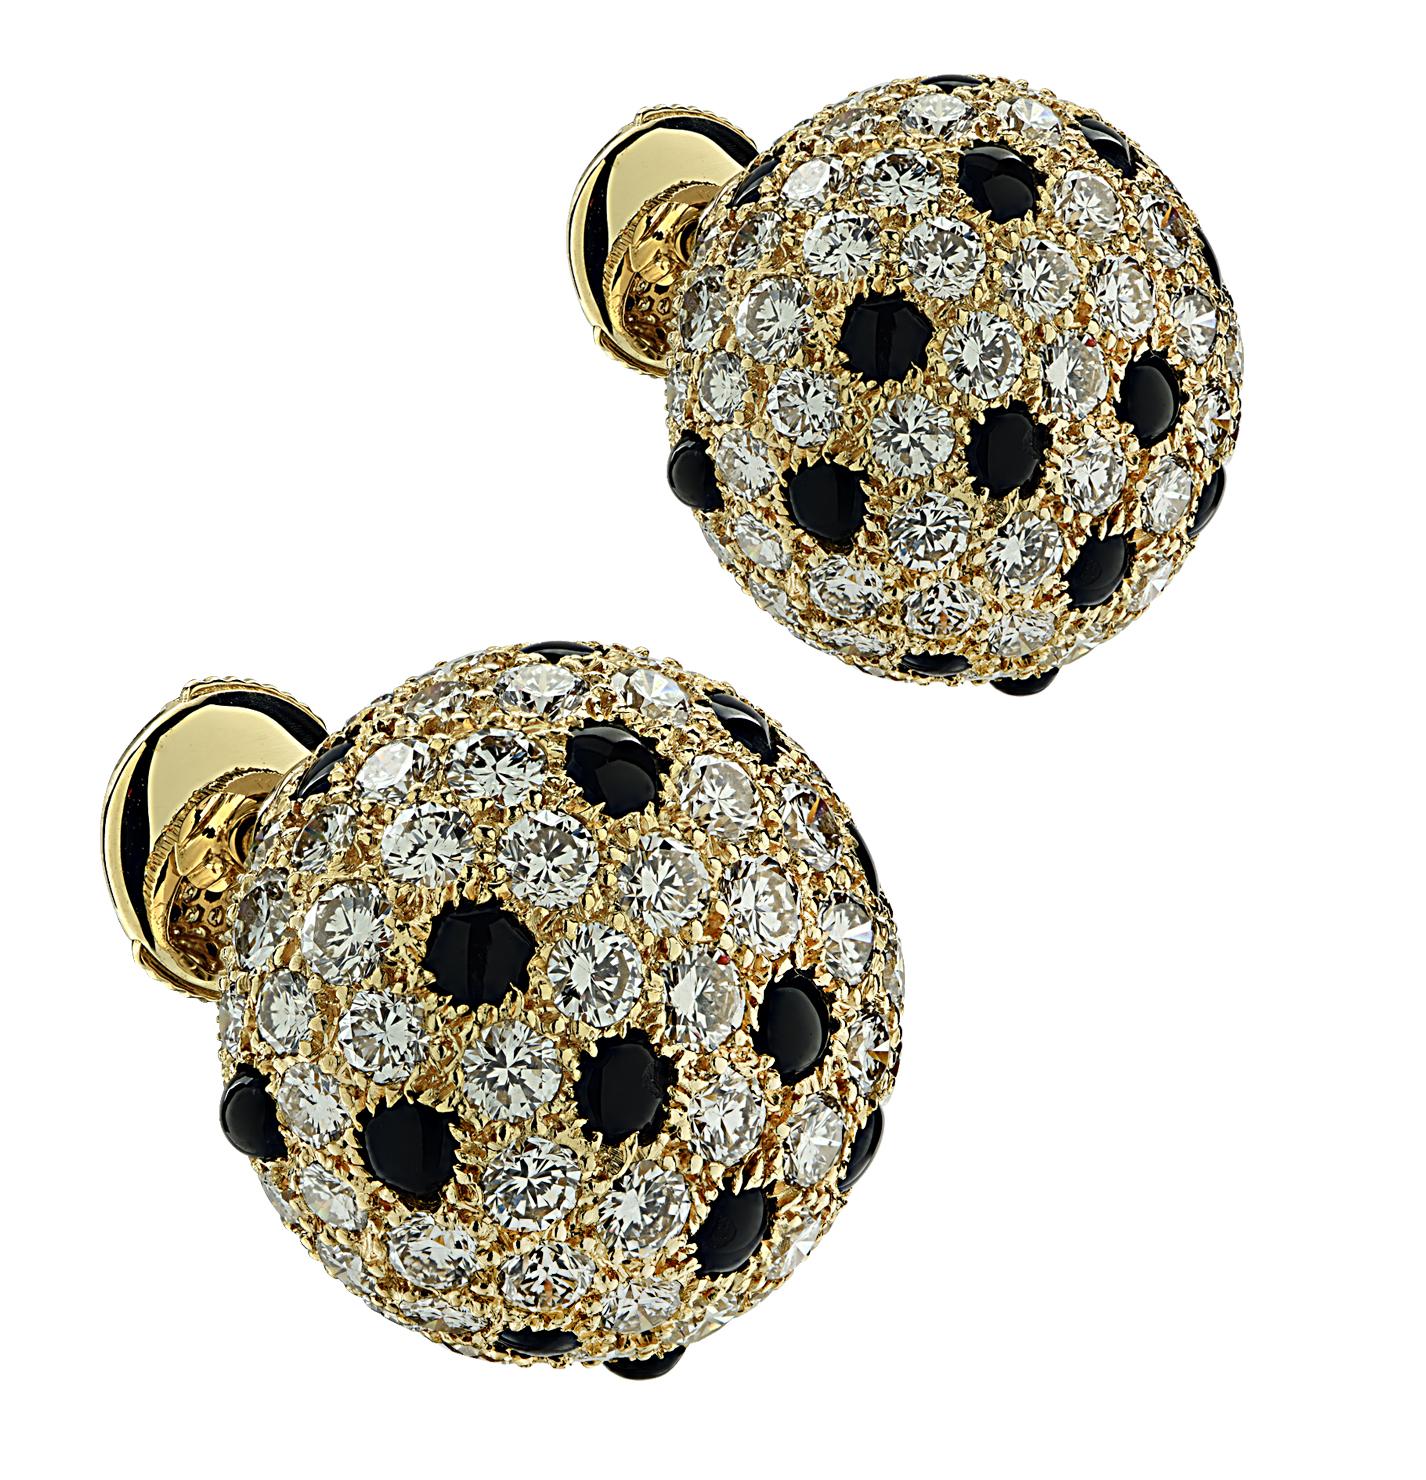 From the House of Cartier, these striking Cartier Panthere bombe stud earrings are crafted in 18 karat yellow gold, and feature round brilliant cut diamonds weighing approximately 4.64 carats total, D-E color, VVS clarity. Round onyx cabachons